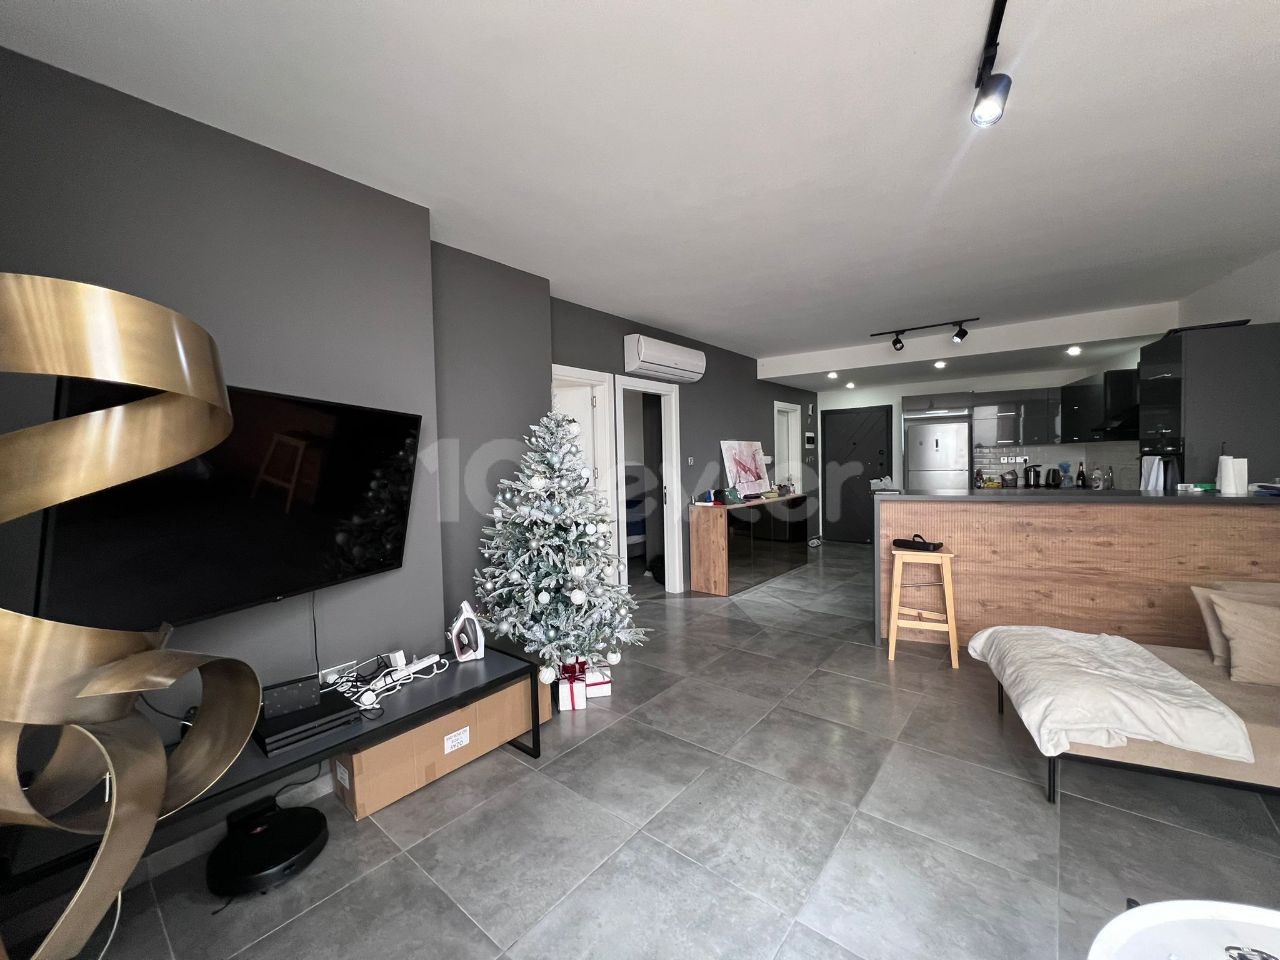 2+1 Flat for Sale in Kyrenia Center from Redstone Island